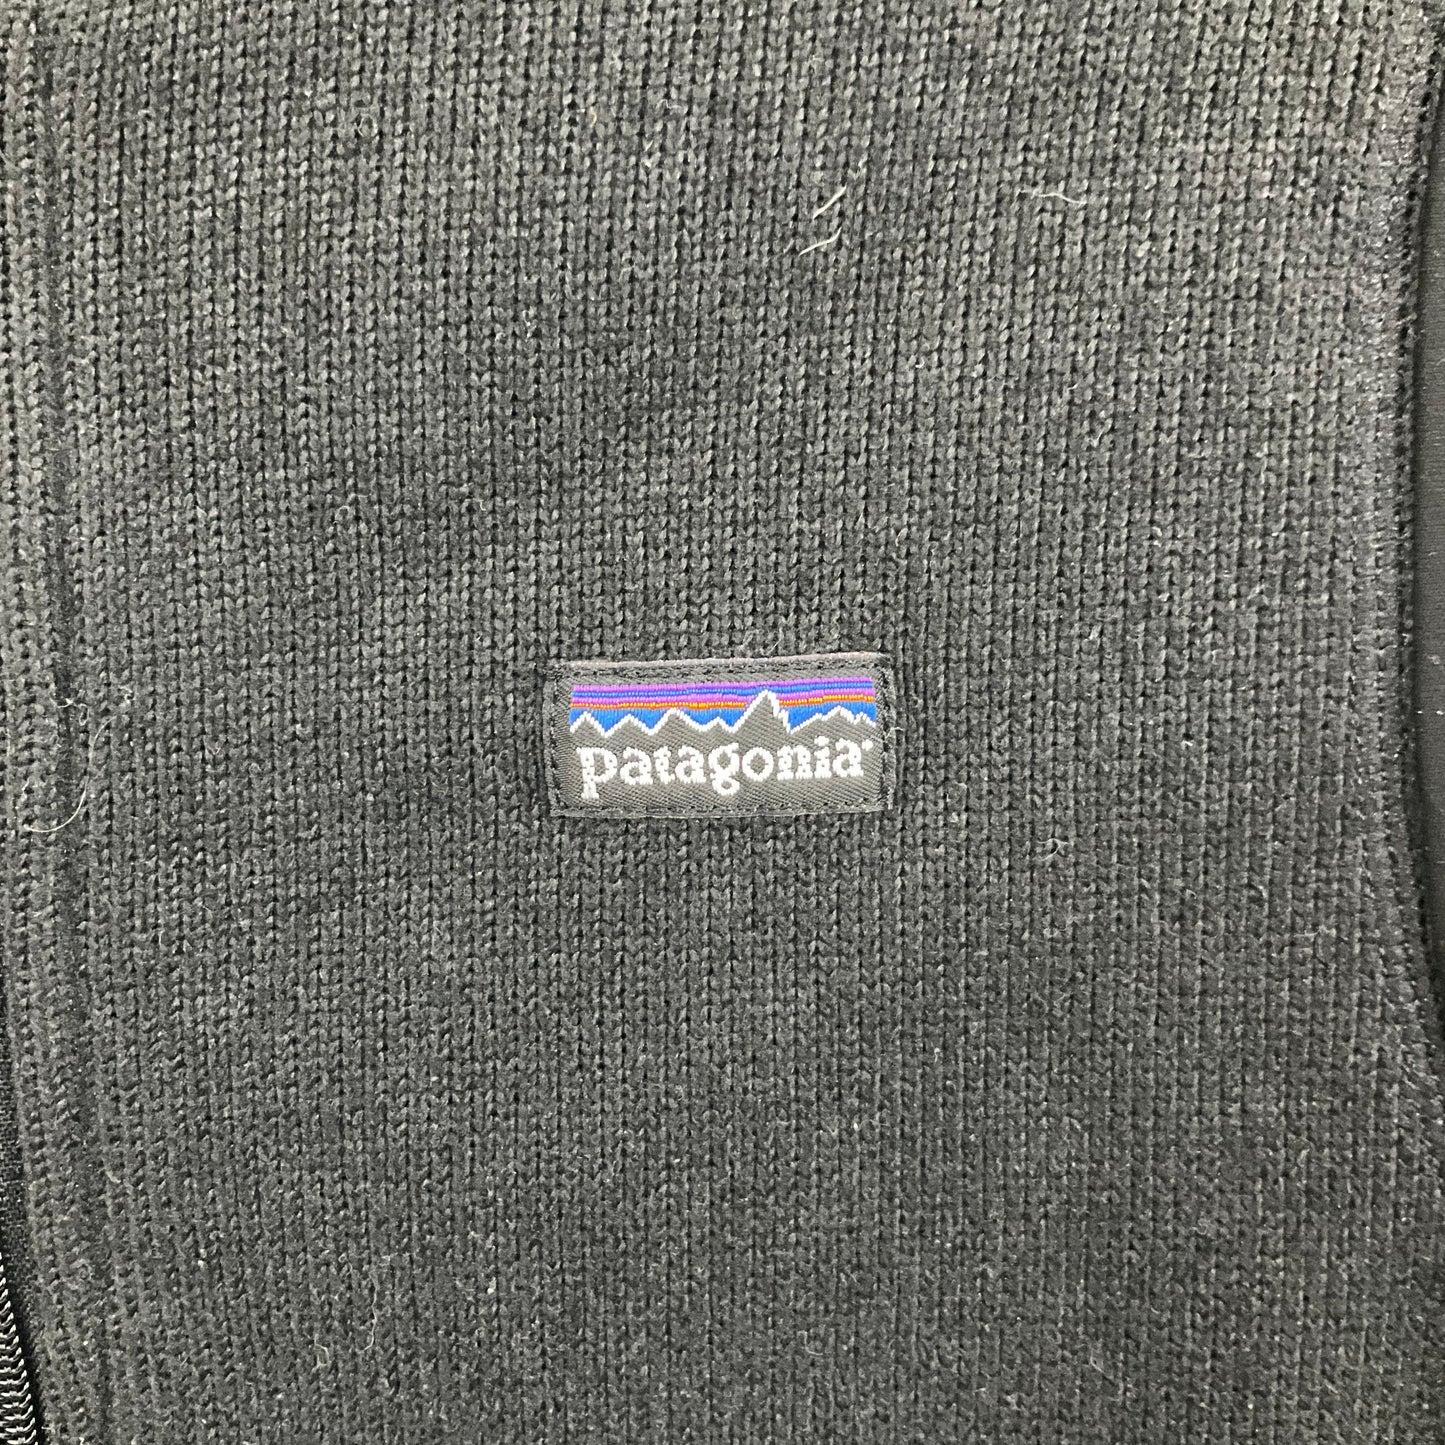 Vest Other By Patagonia  Size: S